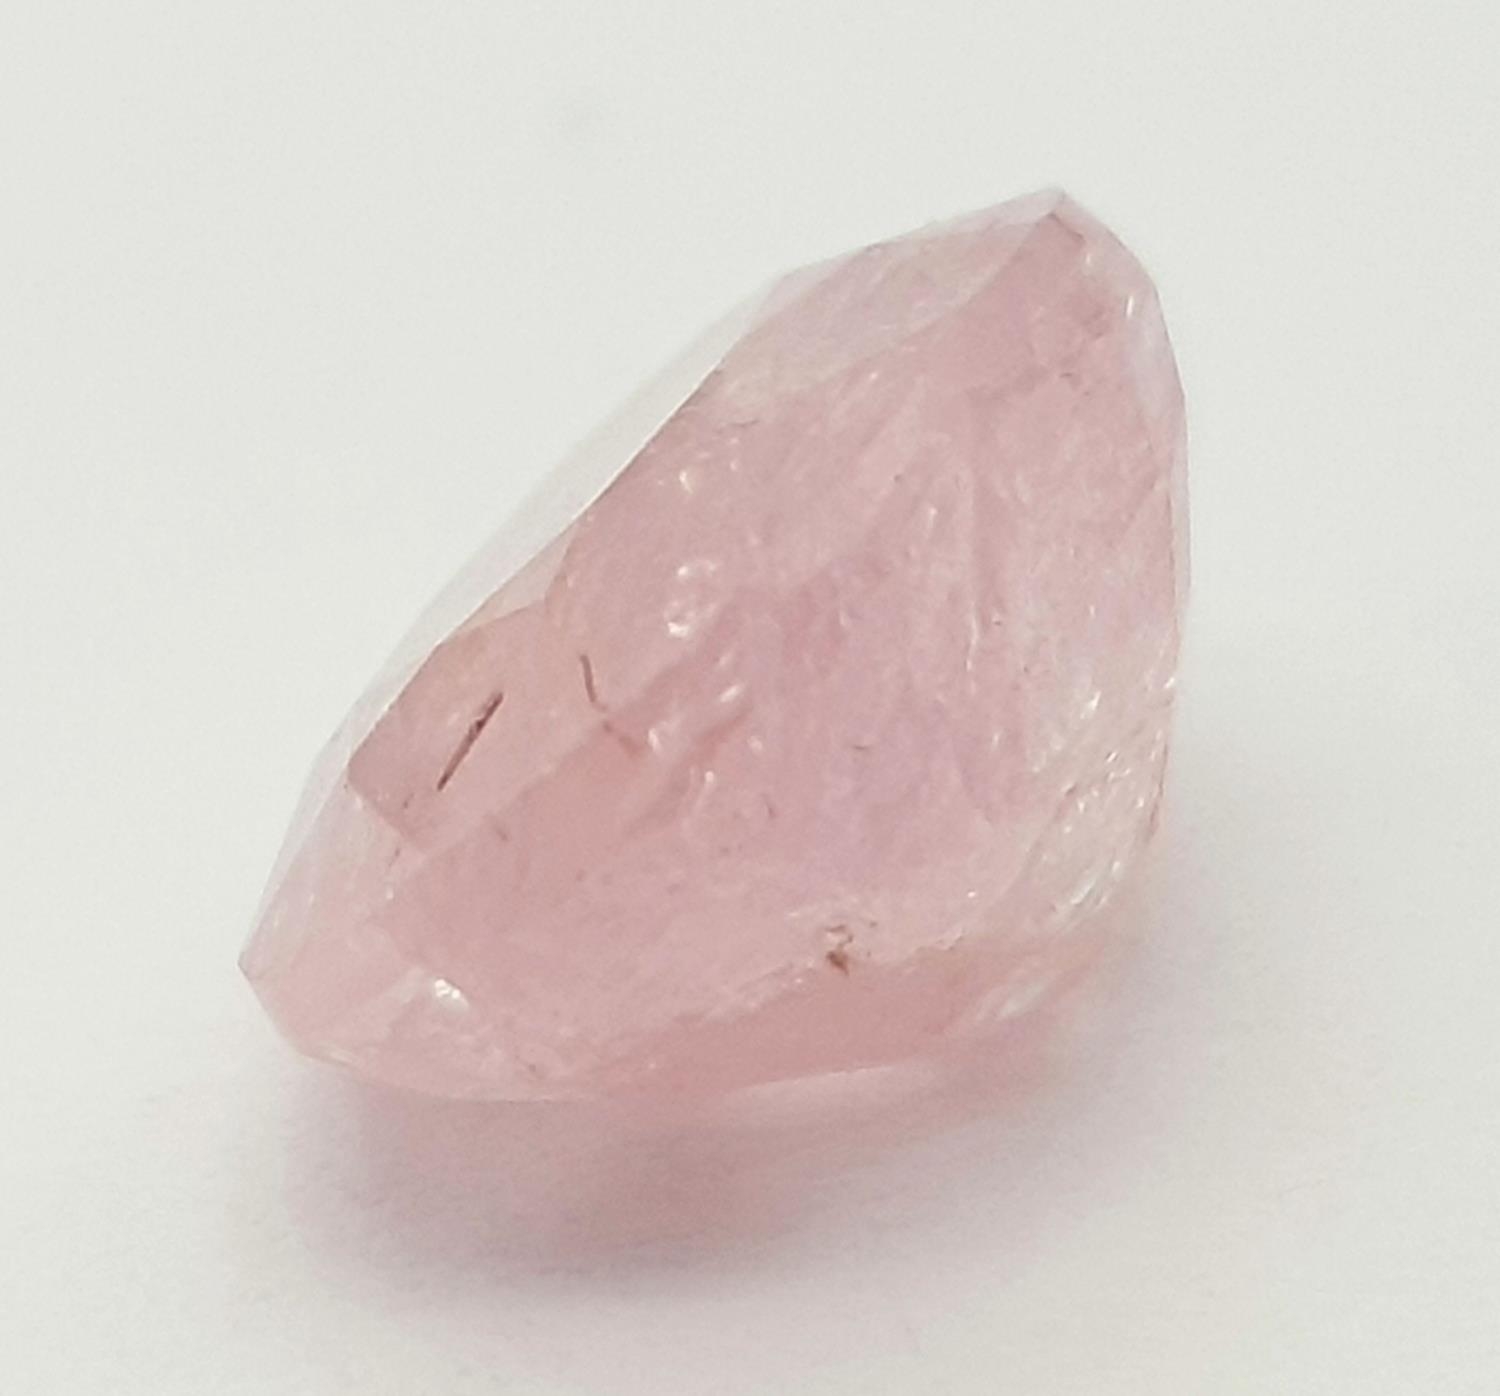 A 5.10ct Rare Peach-Pink Coloured Untreated Sapphire Gemstone - GFCO Swiss Certified. - Image 3 of 6